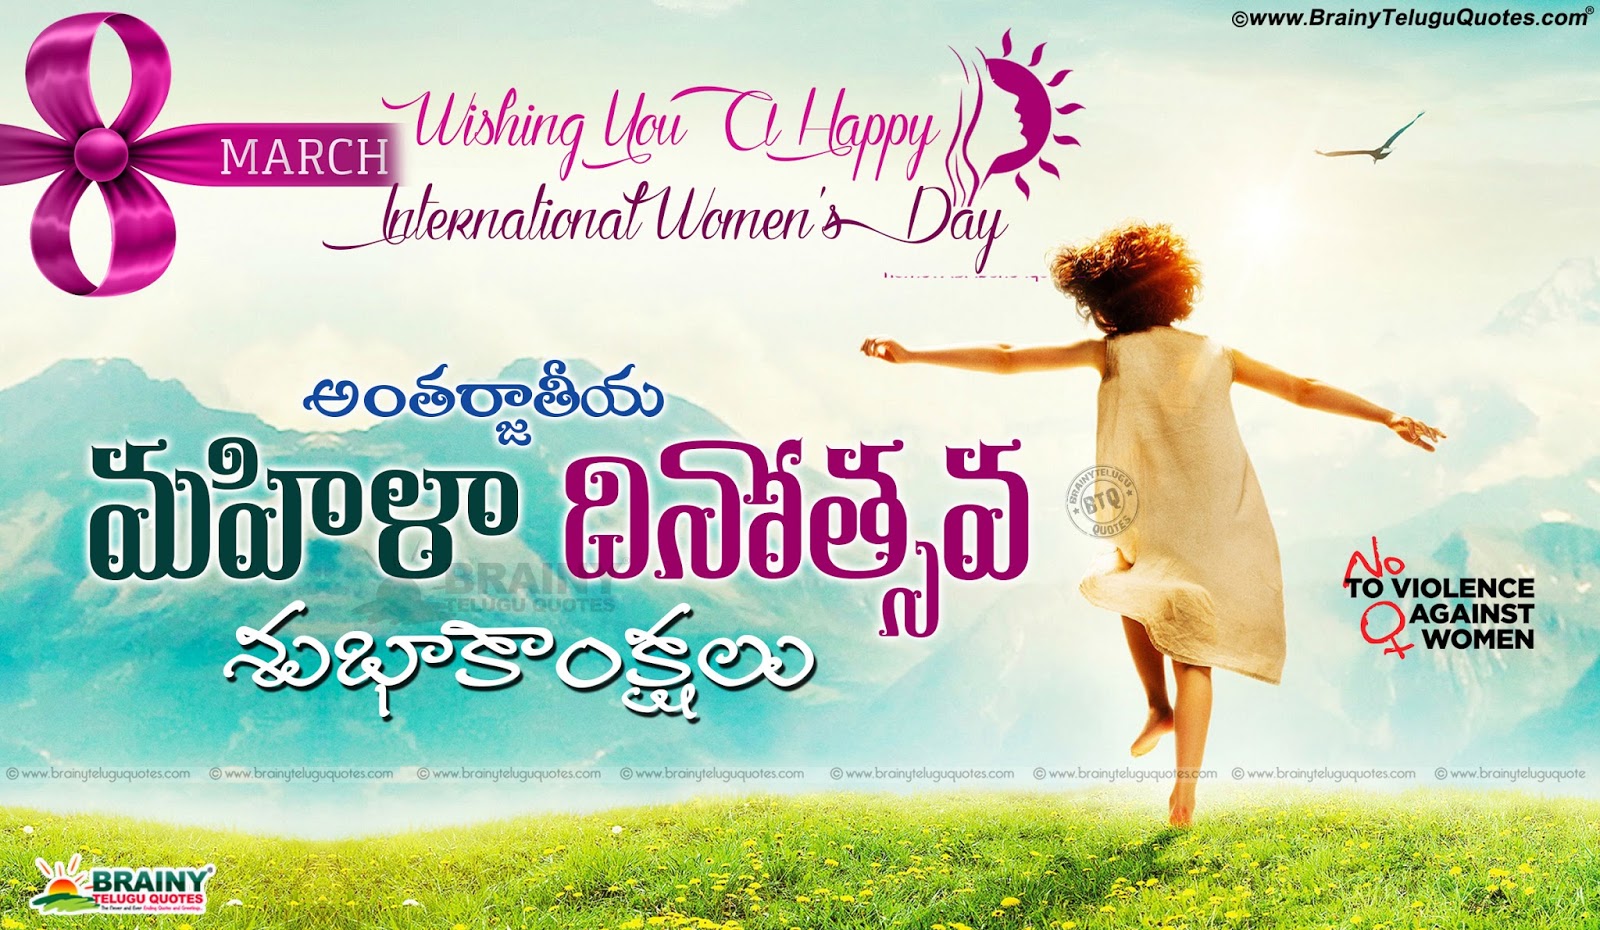 Happy International Woman s Day greetings with hd wallpapers Woman s day messages in Telugu